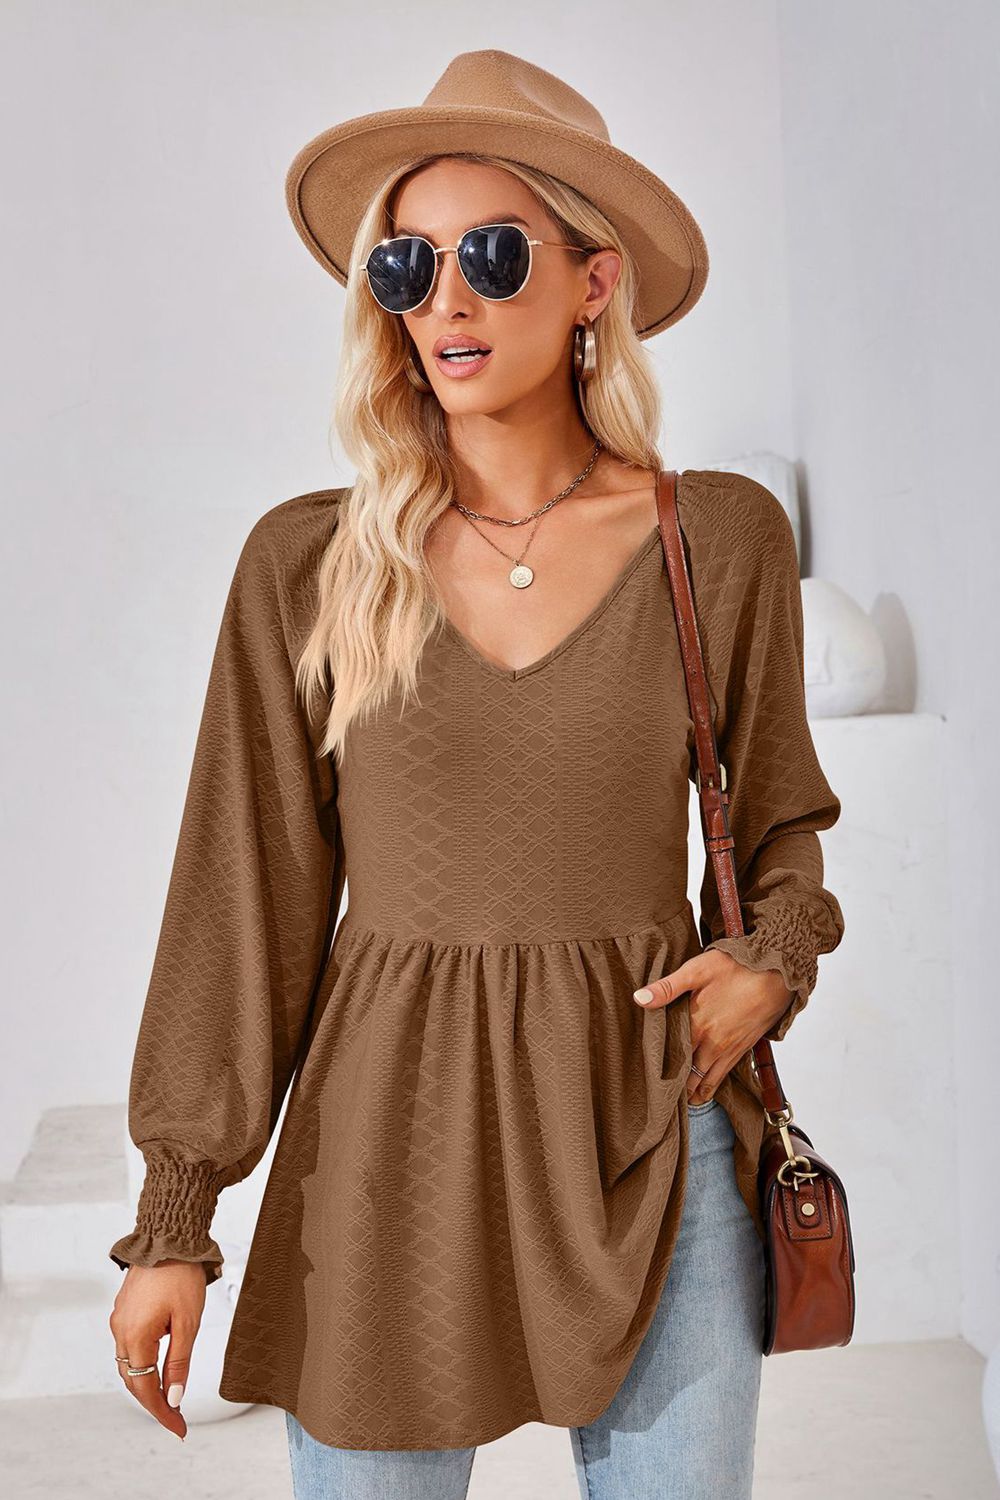 V-Neck Lantern Sleeve Blouse - Brown / S - Women’s Clothing & Accessories - Shirts & Tops - 13 - 2024